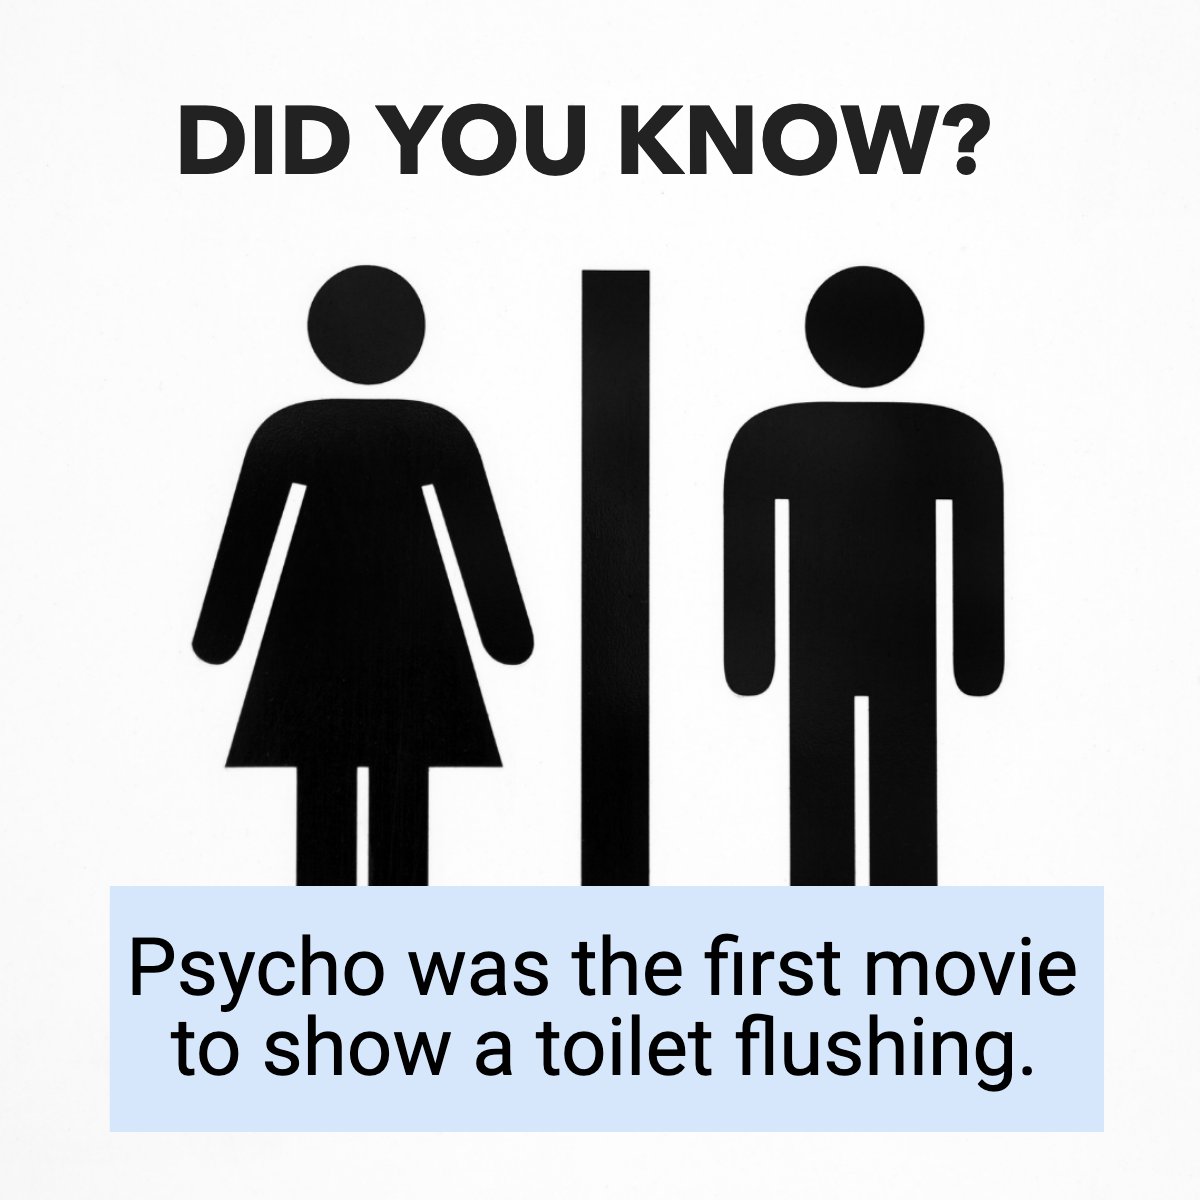 Psycho is an iconic movie that is still considered and viewed as a classic. 

But did you know?

Psycho was the first movie to show a toilet flushing. 

#MyrtleBeach #SCRealEstate #Beachliving #BRGRealEstate #AndreaWhiteRealtor #SouthCarolinaHome #MovetoMyrtleBeach